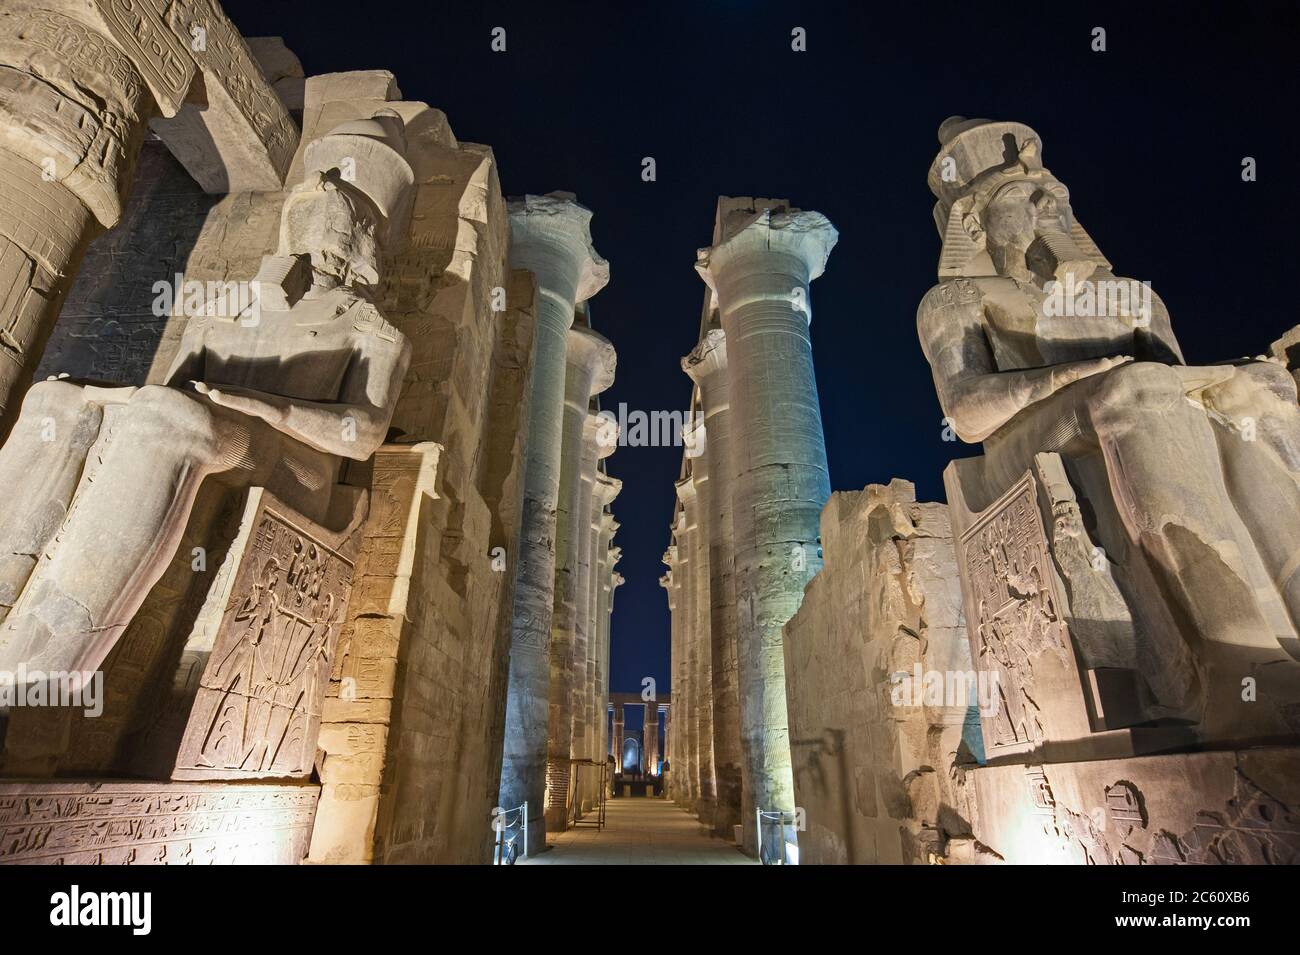 Large statues of Ramses II with columns in hypostyle hall at ancient egyptian Luxor Temple lit up during night Stock Photo